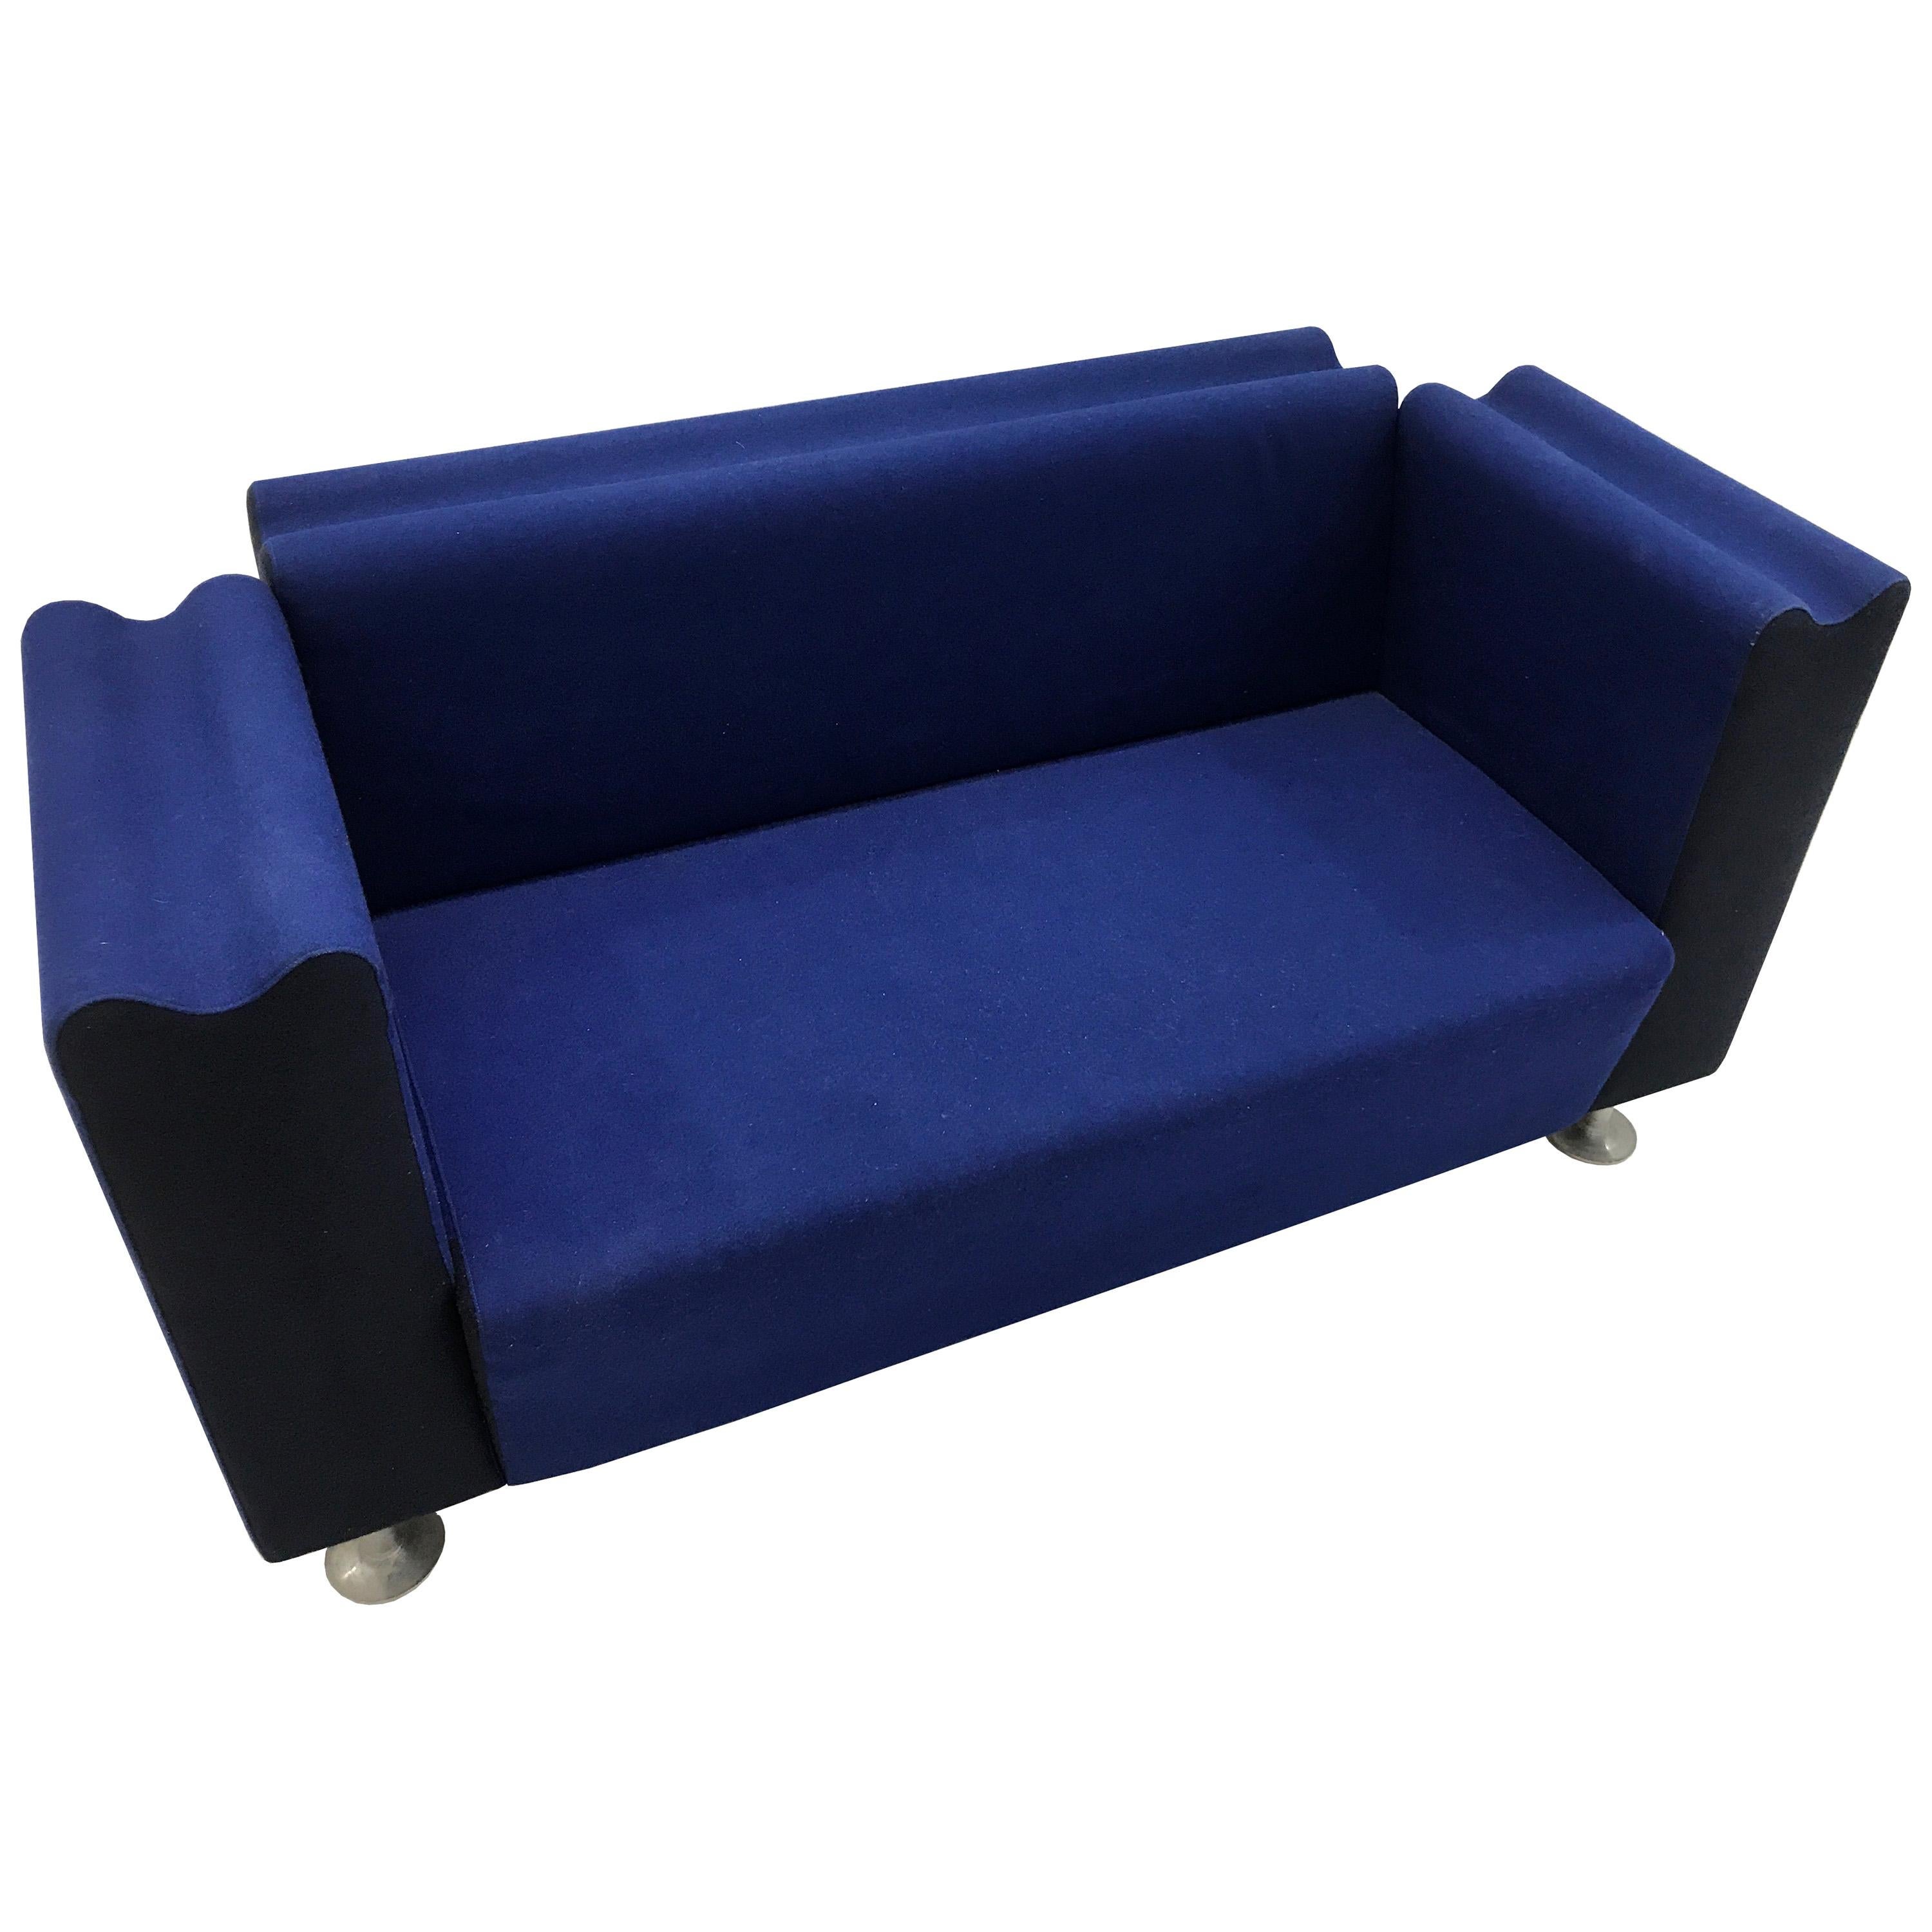 Moroso M Collection Blue Kvadrat Wool Sofa System by Ross Lovegrove For Sale